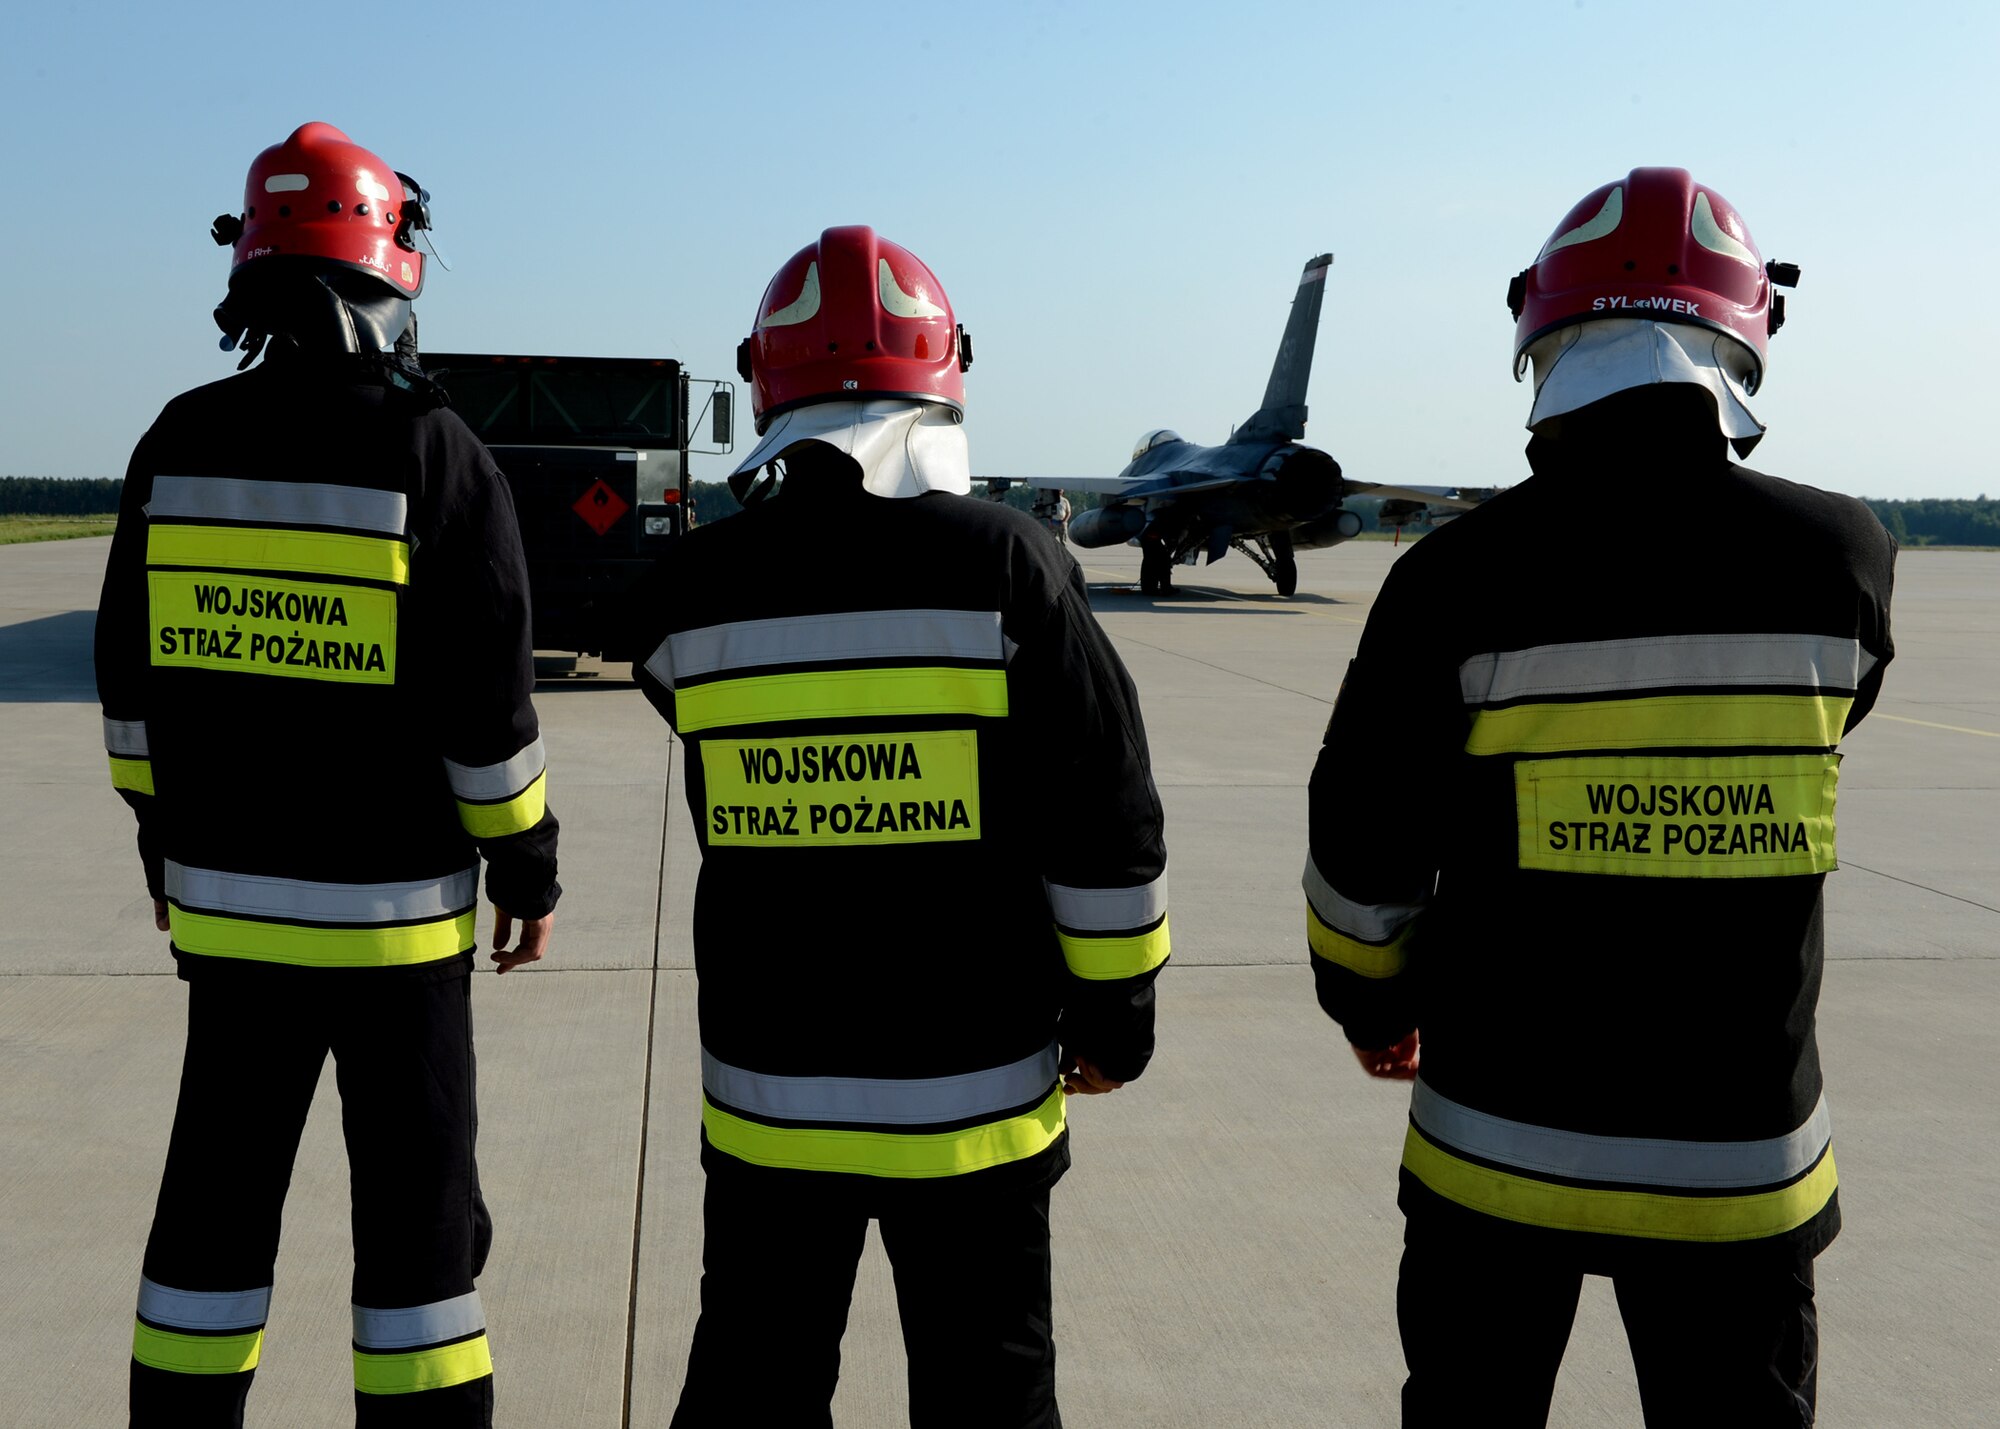 Polish fire rescue men stand watch over U.S. Air Force F-16 Fighting Falcon fighter aircraft refueling operations at a hot refueling pit at Lask Air Base, Poland, June 9, 2014. During Polish-led EAGLE TALON and U.S. Navy-led BALTOPS 14, NATO allies worked together to increase interoperability and mission effectiveness while maintaining security in Eastern Europe.This is the first time hot pit refueling has been done in Poland by U.S. Forces. (U.S. Air Force photo by Airman 1st Class Kyle Gese/Released)